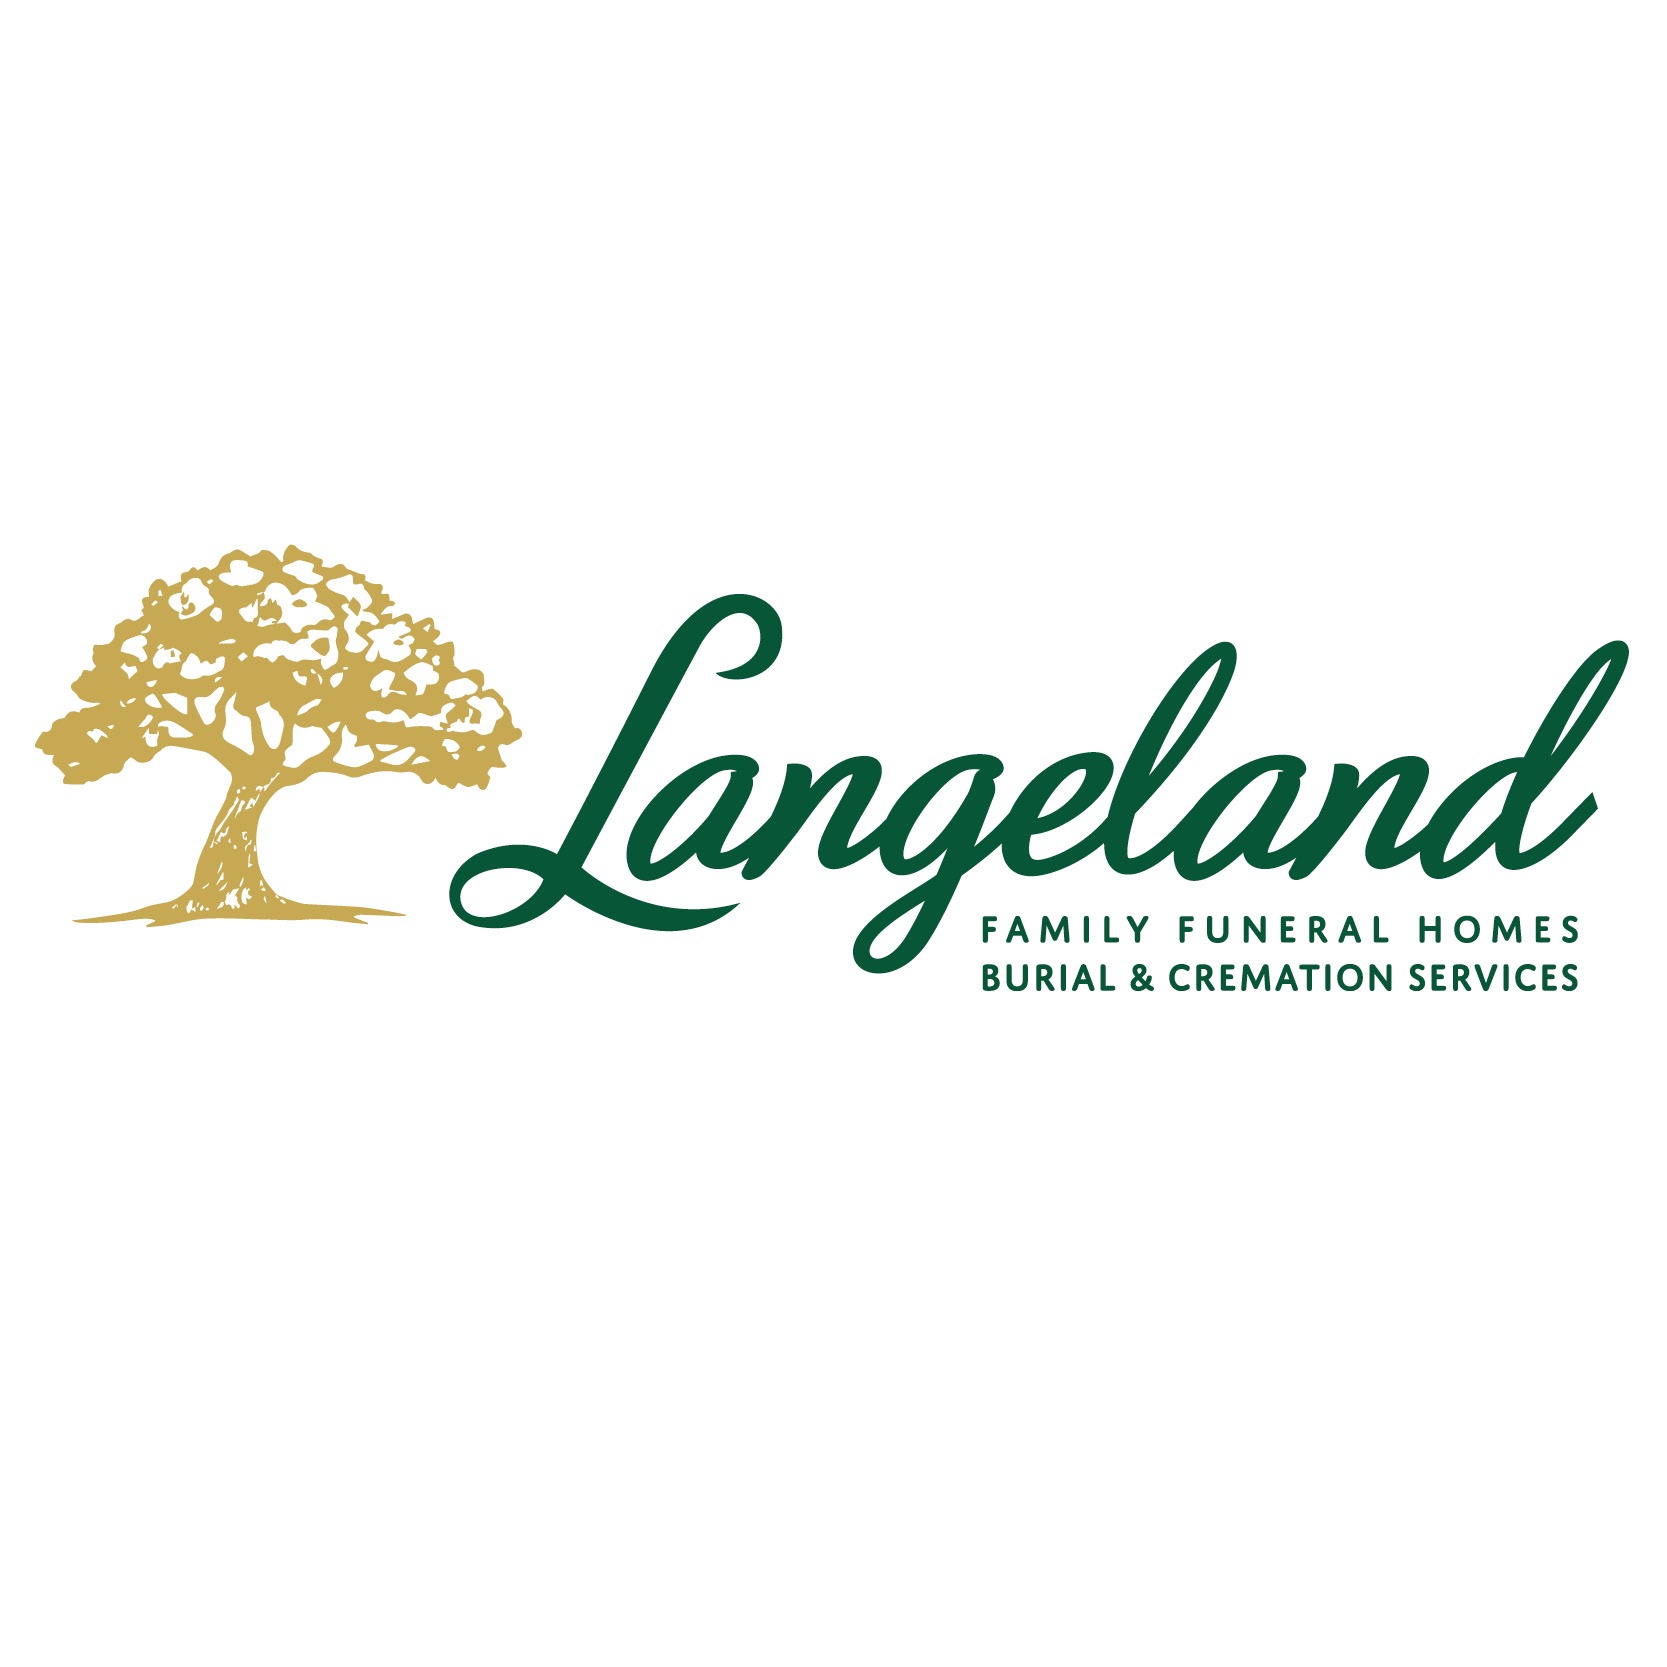 Langeland Family Funeral Homes Burial & Cremation Services Photo